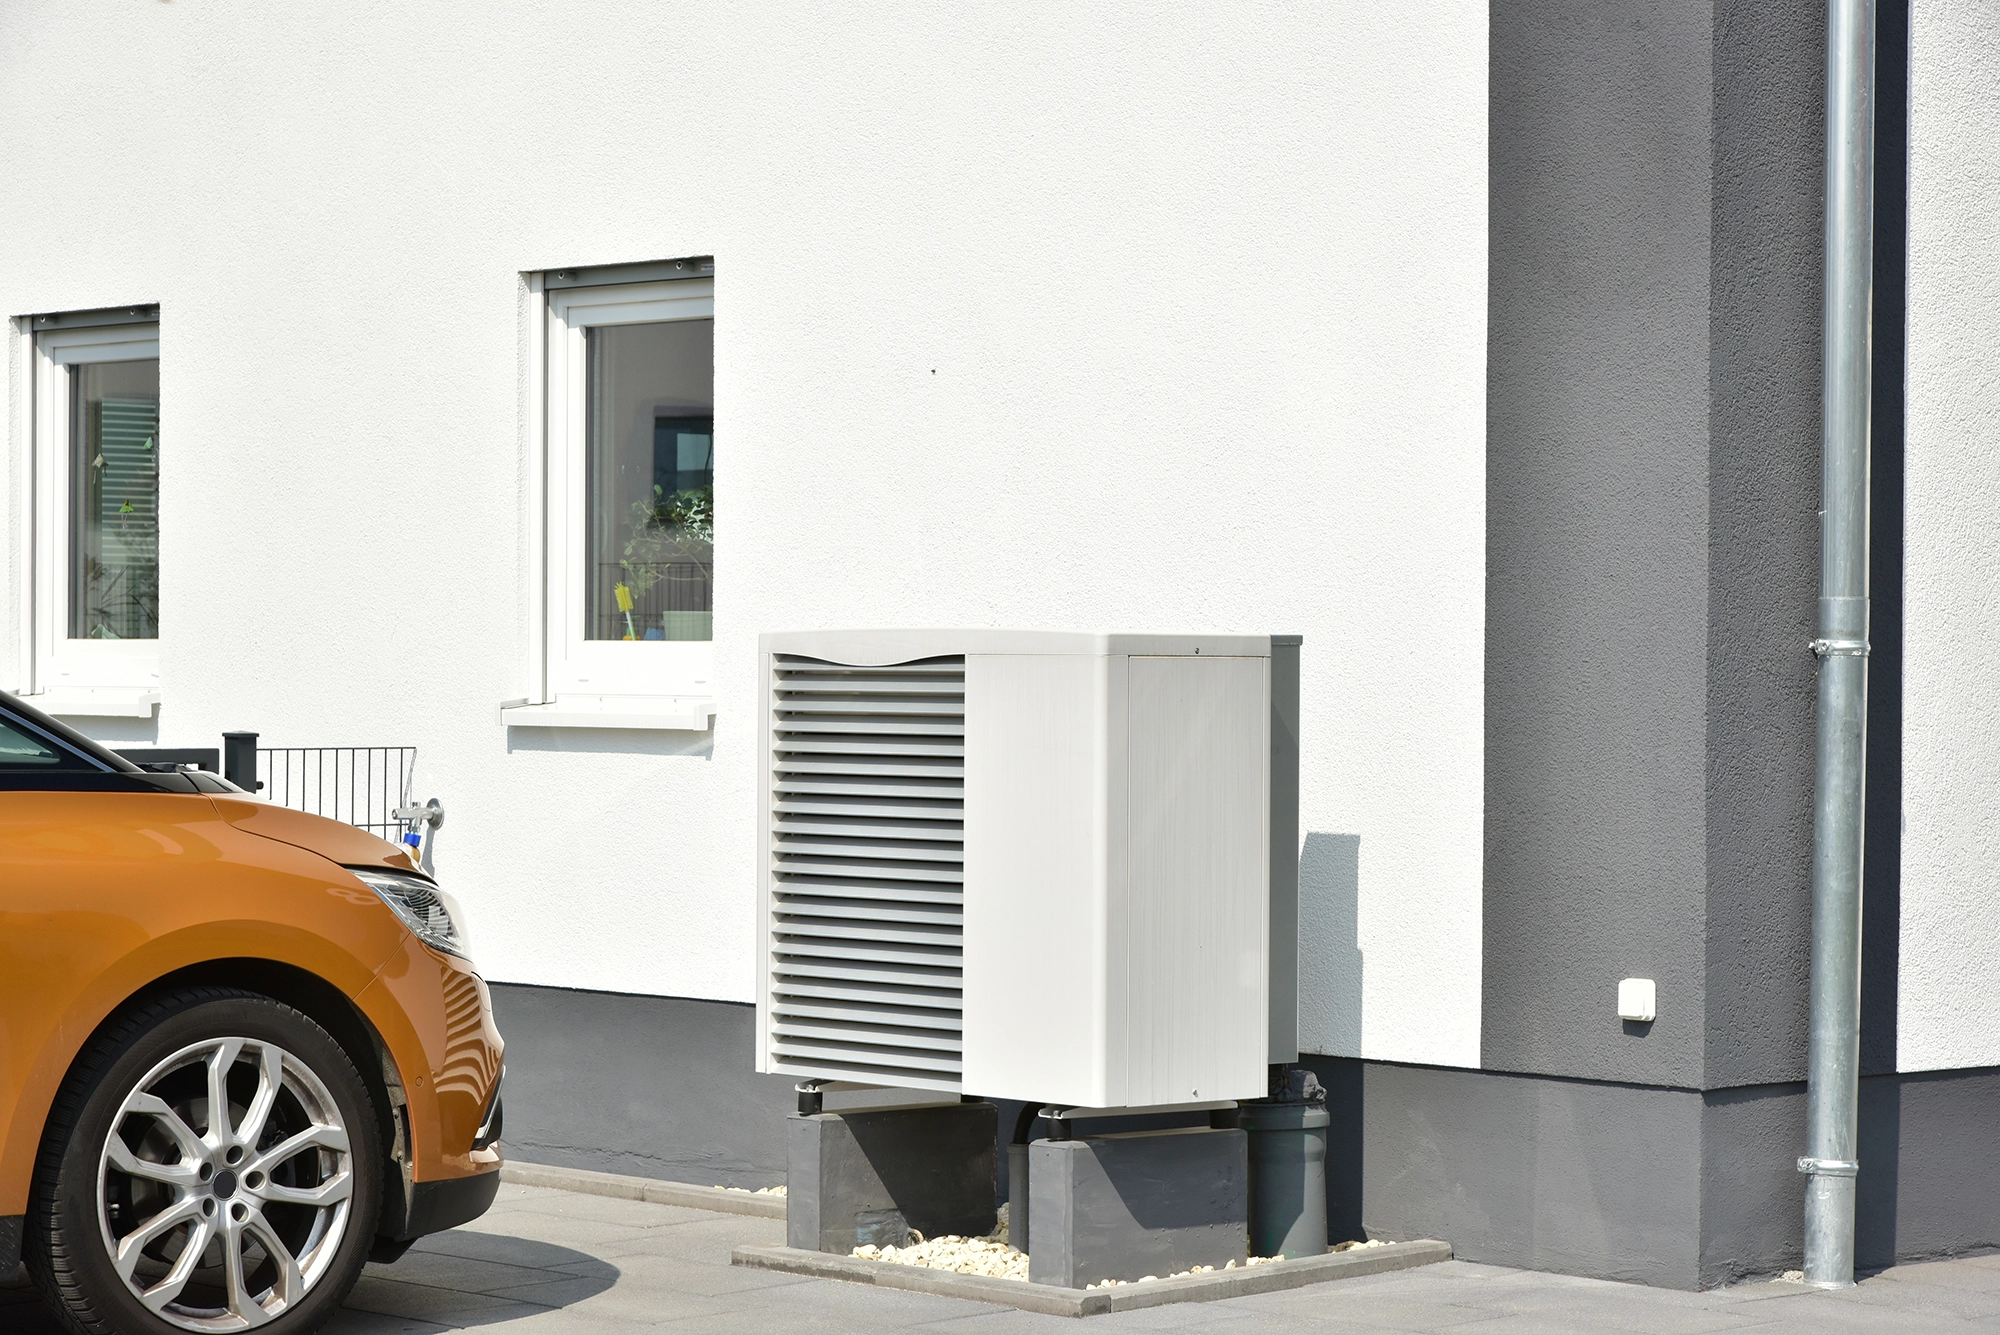 Image of an outdoor air source heat pump unit next to a parked car, being inspected after a powerflushing procedure.